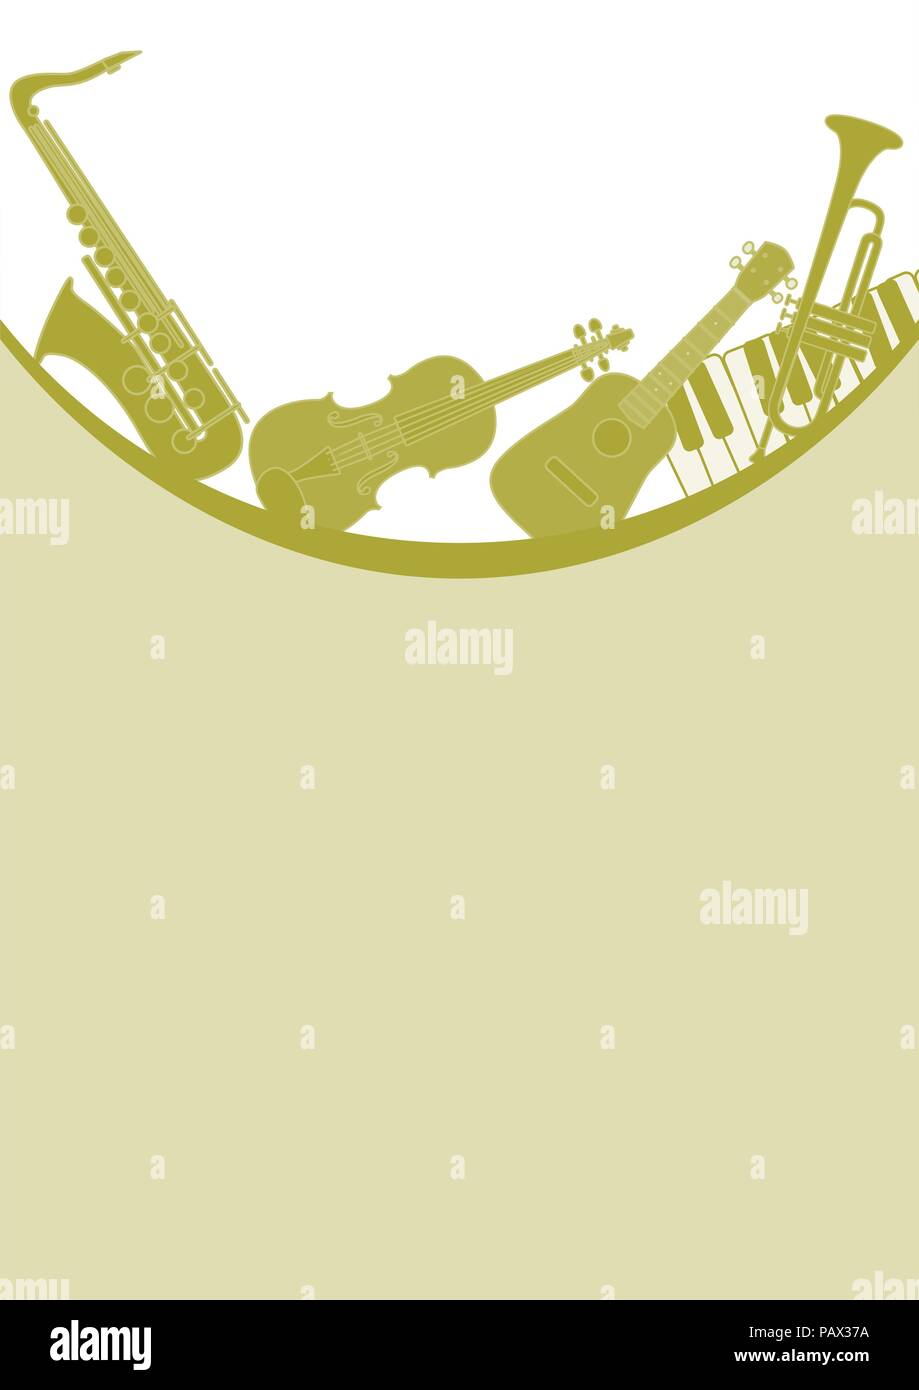 Music instruments poster Stock Vector